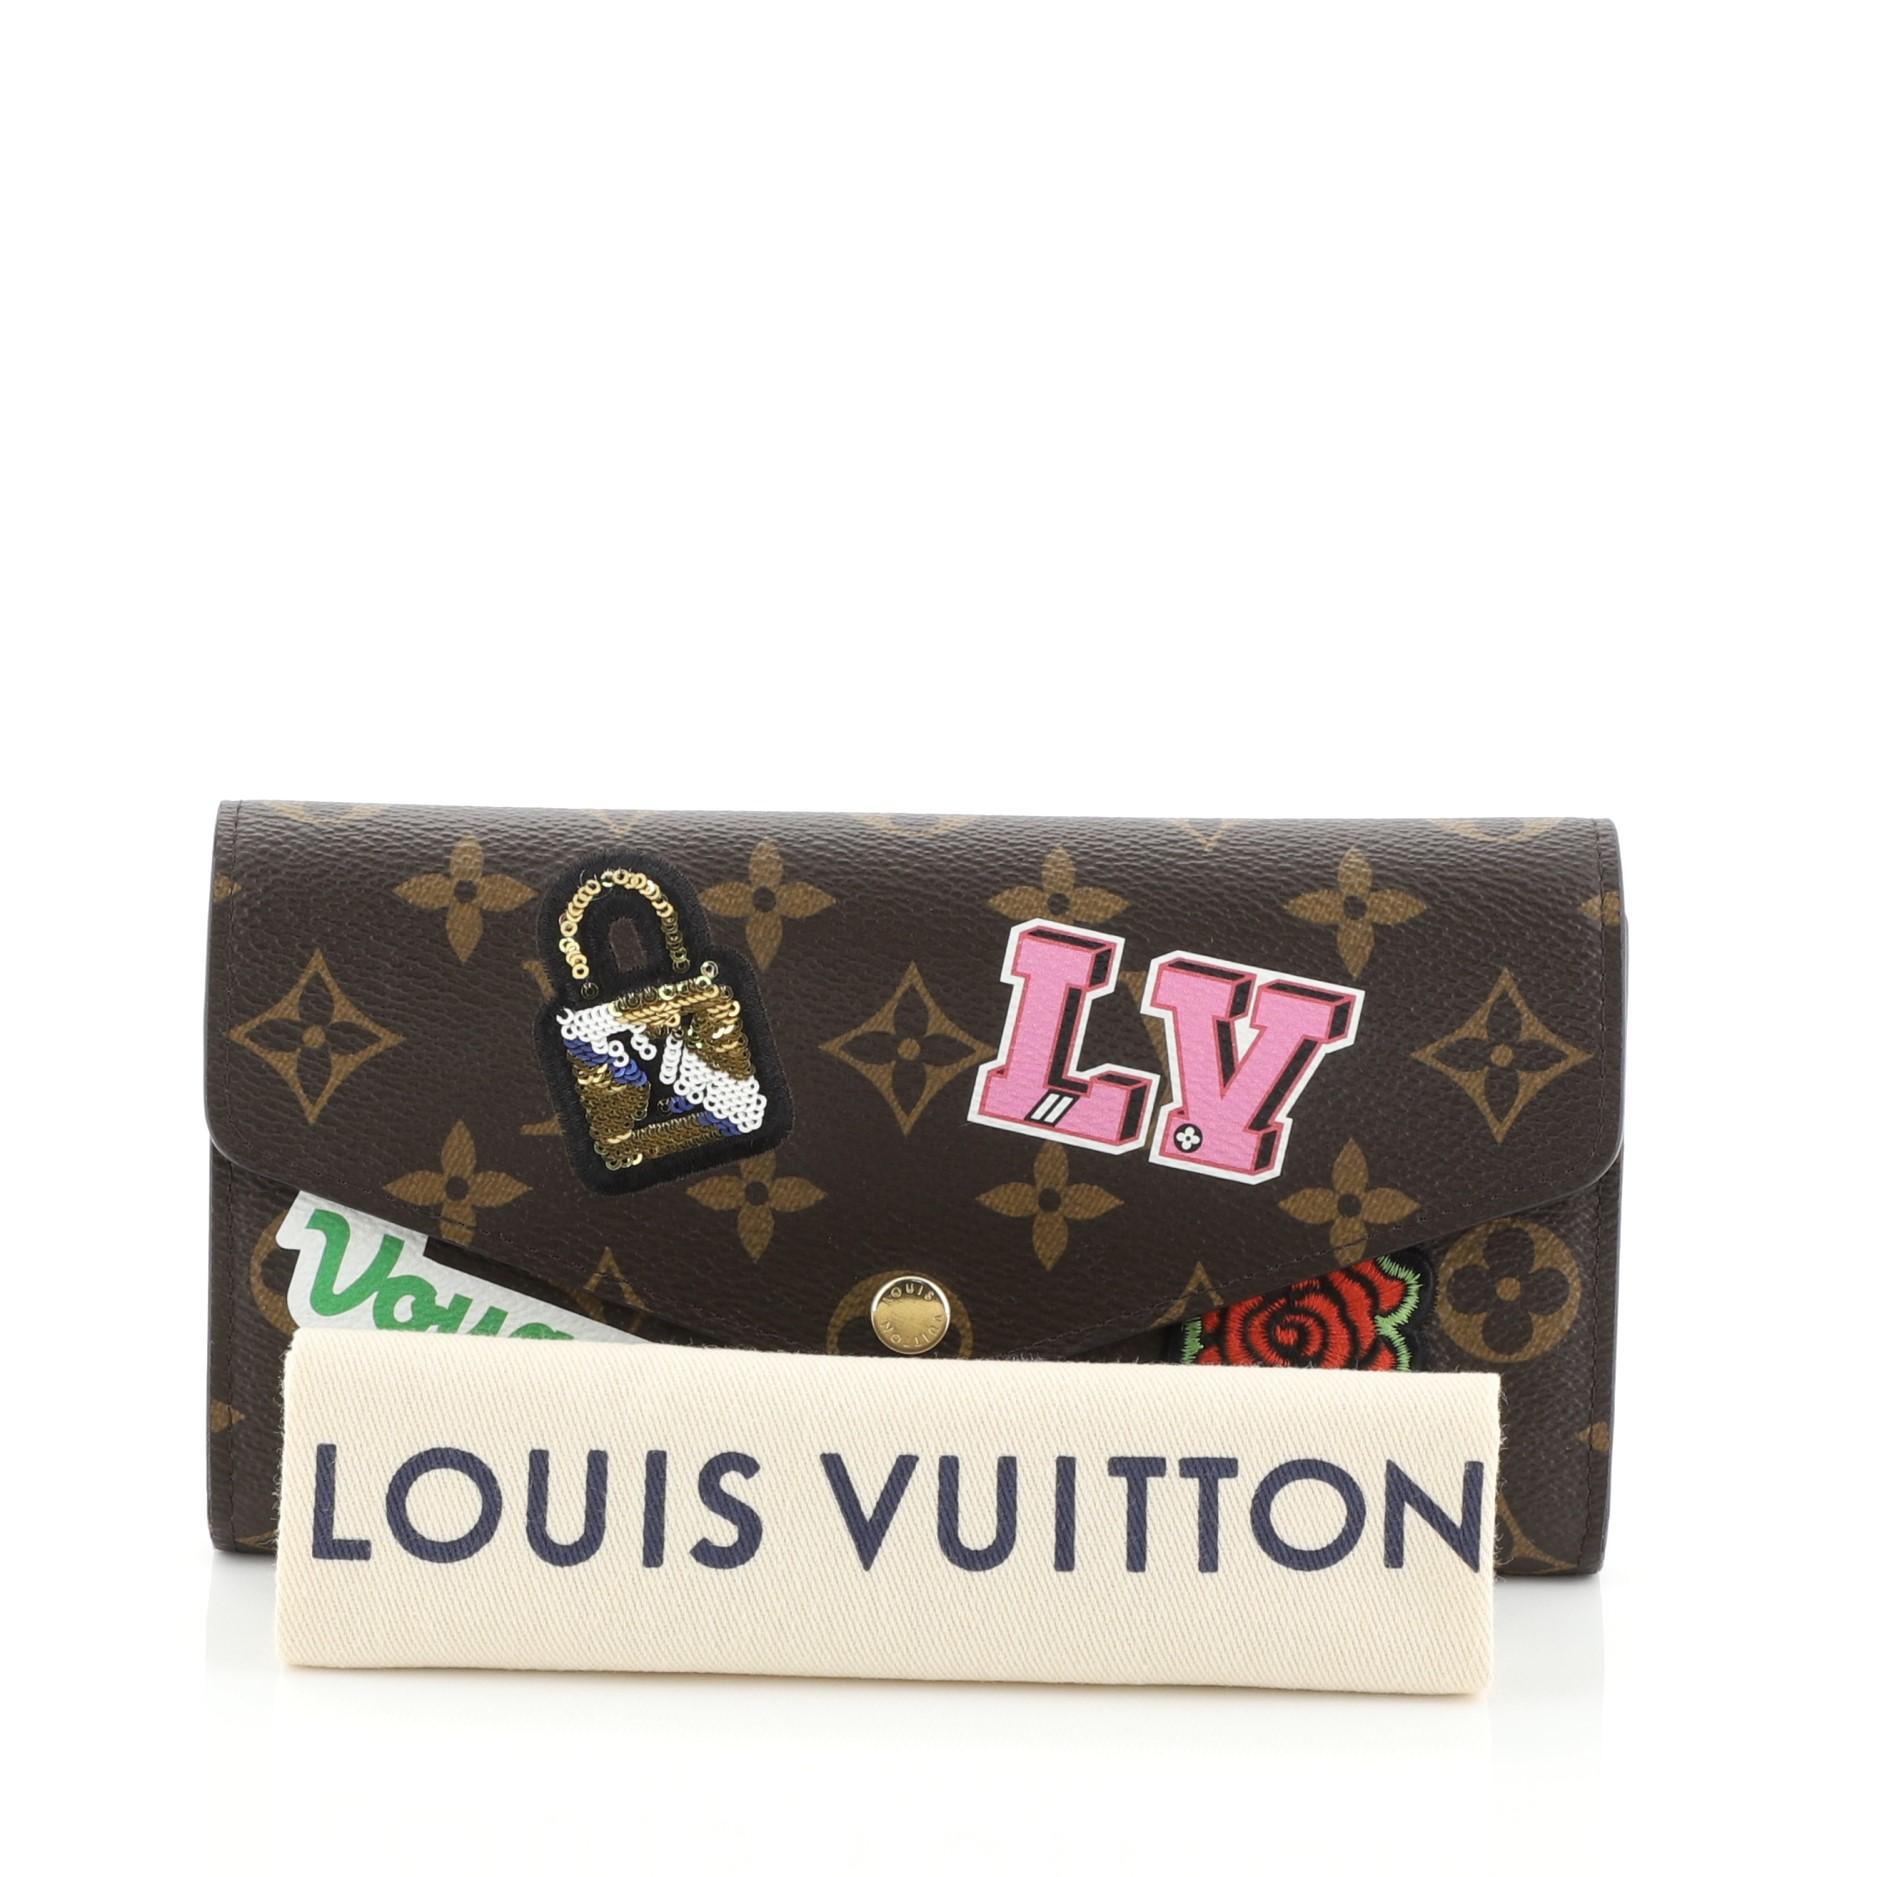 This Louis Vuitton Sarah Wallet NM Limited Edition Patches Monogram Canvas, crafted from brown monogram coated canvas, features an envelope-style frontal flap, multicolor patches, and gold-tone hardware. Its snap button closure opens to a pink